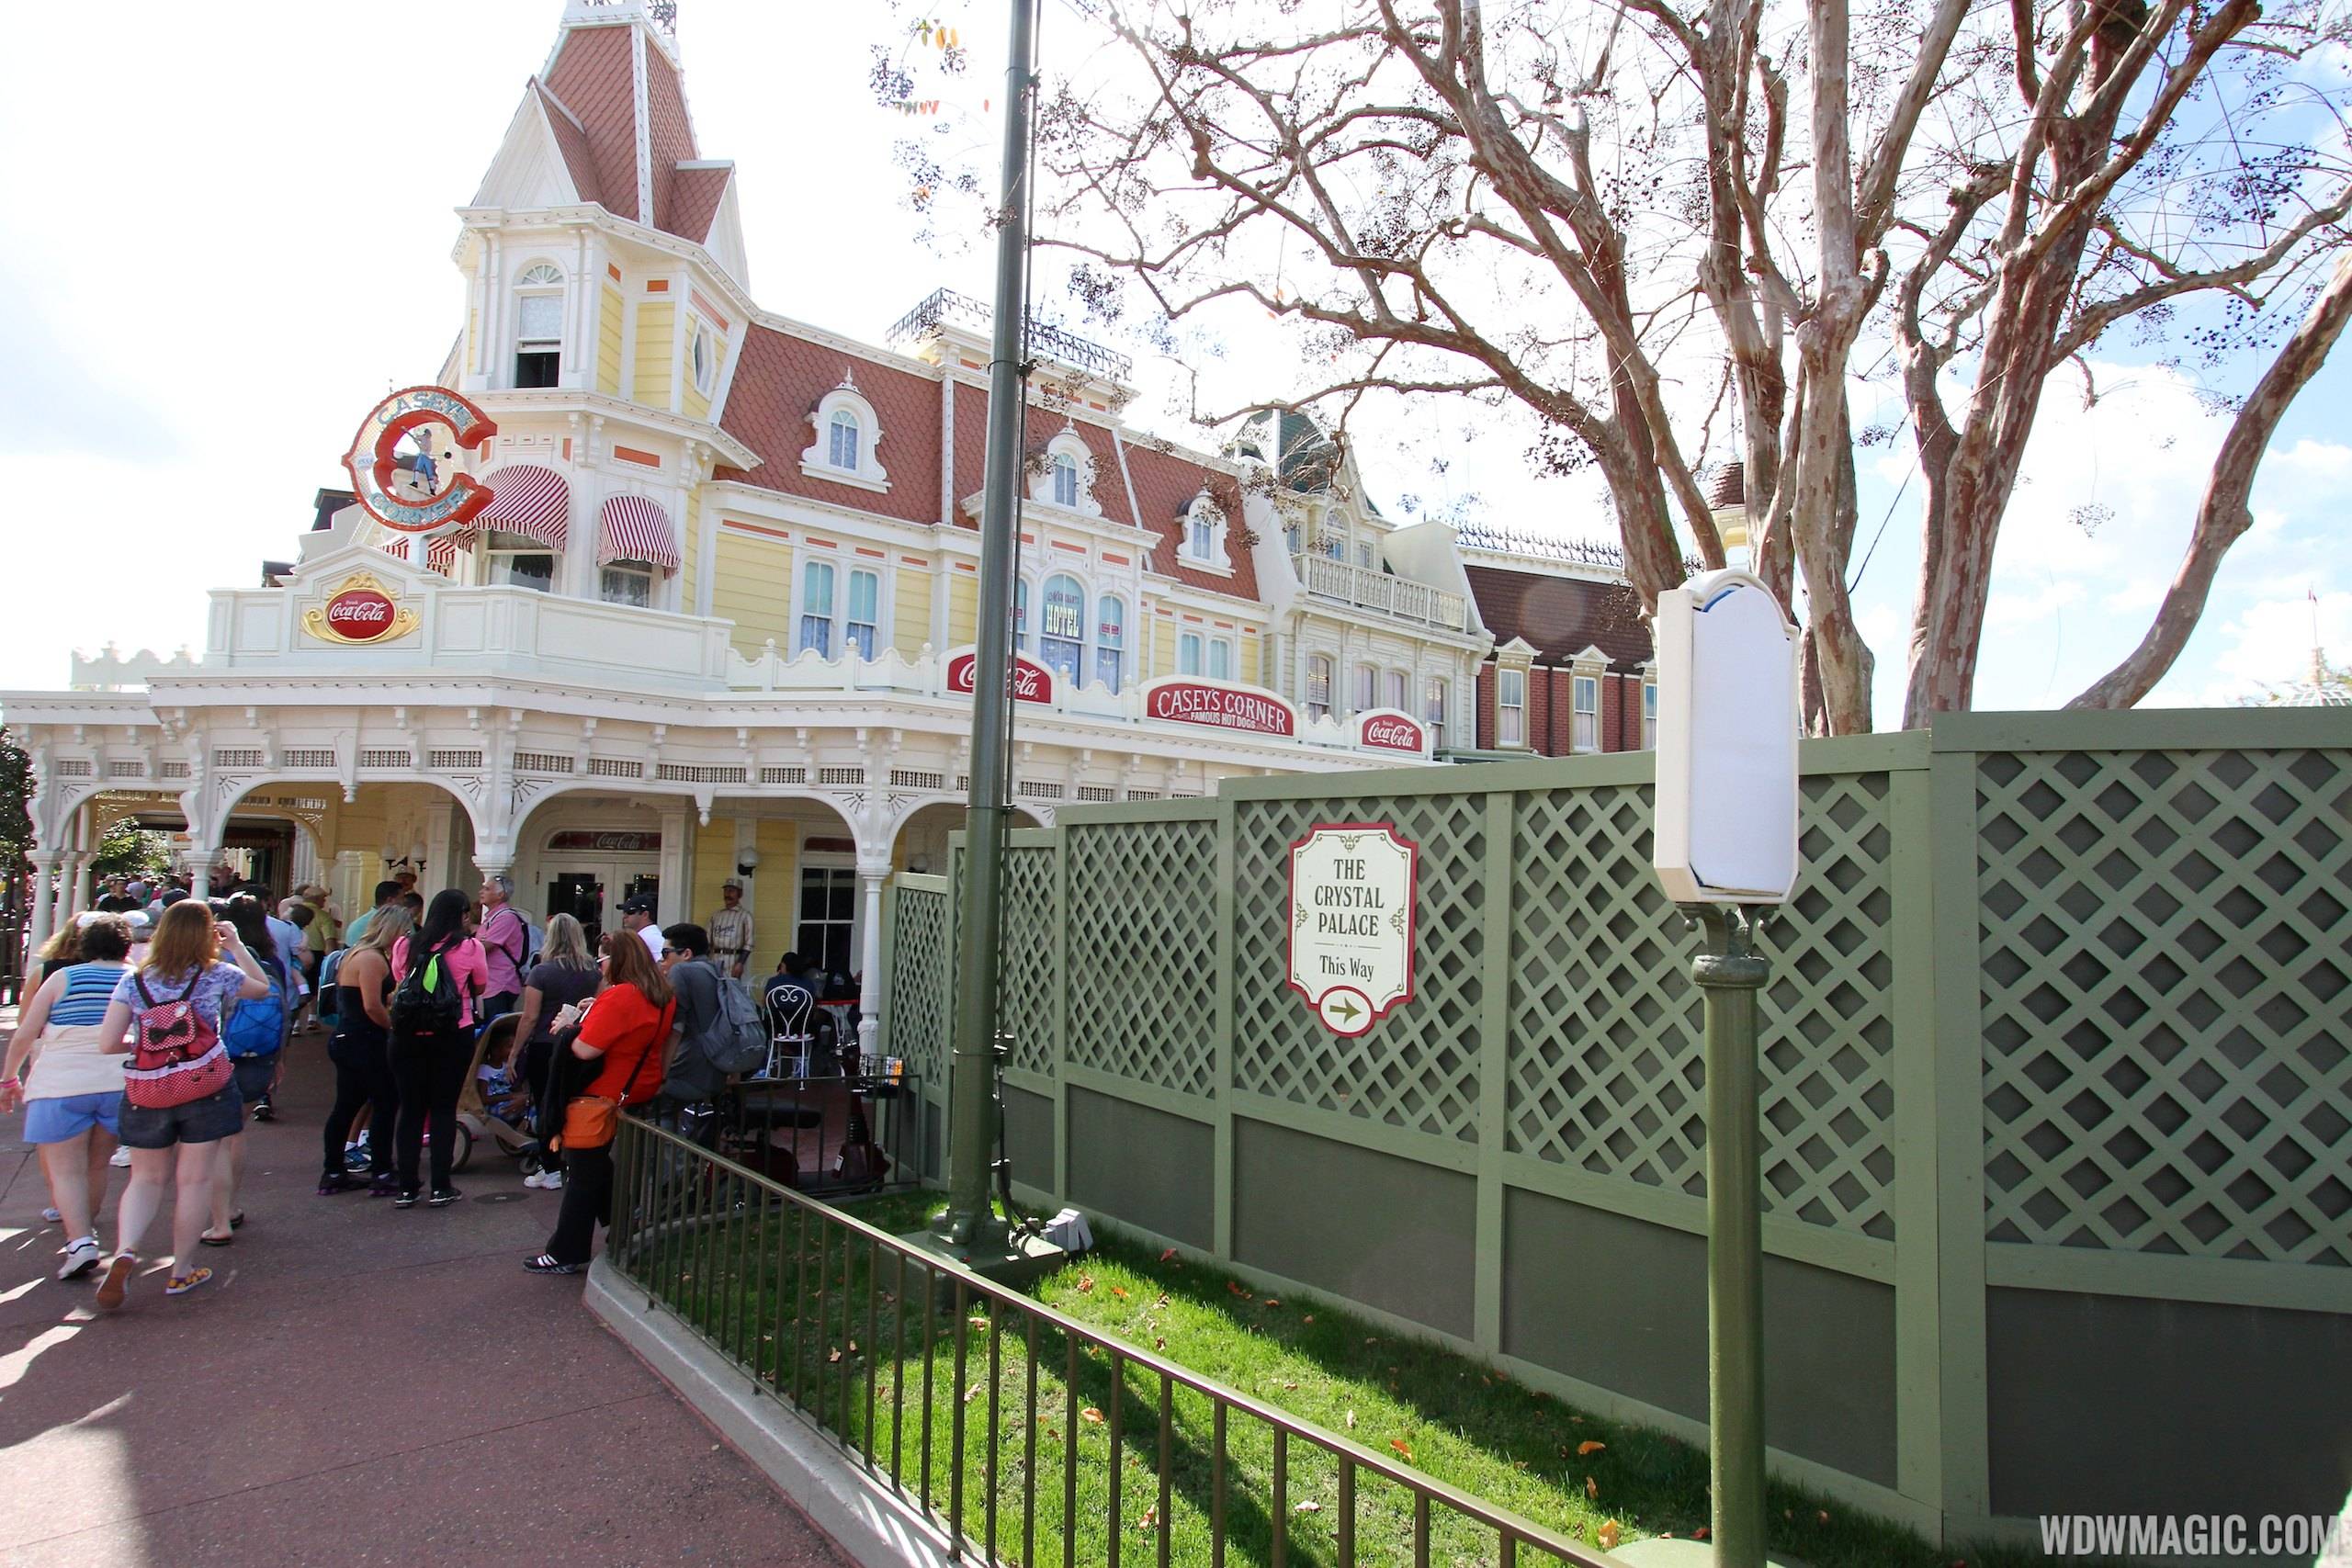 PHOTOS - A look at the Casey's Corner outdoor seating area expansion at the Magic Kingdom